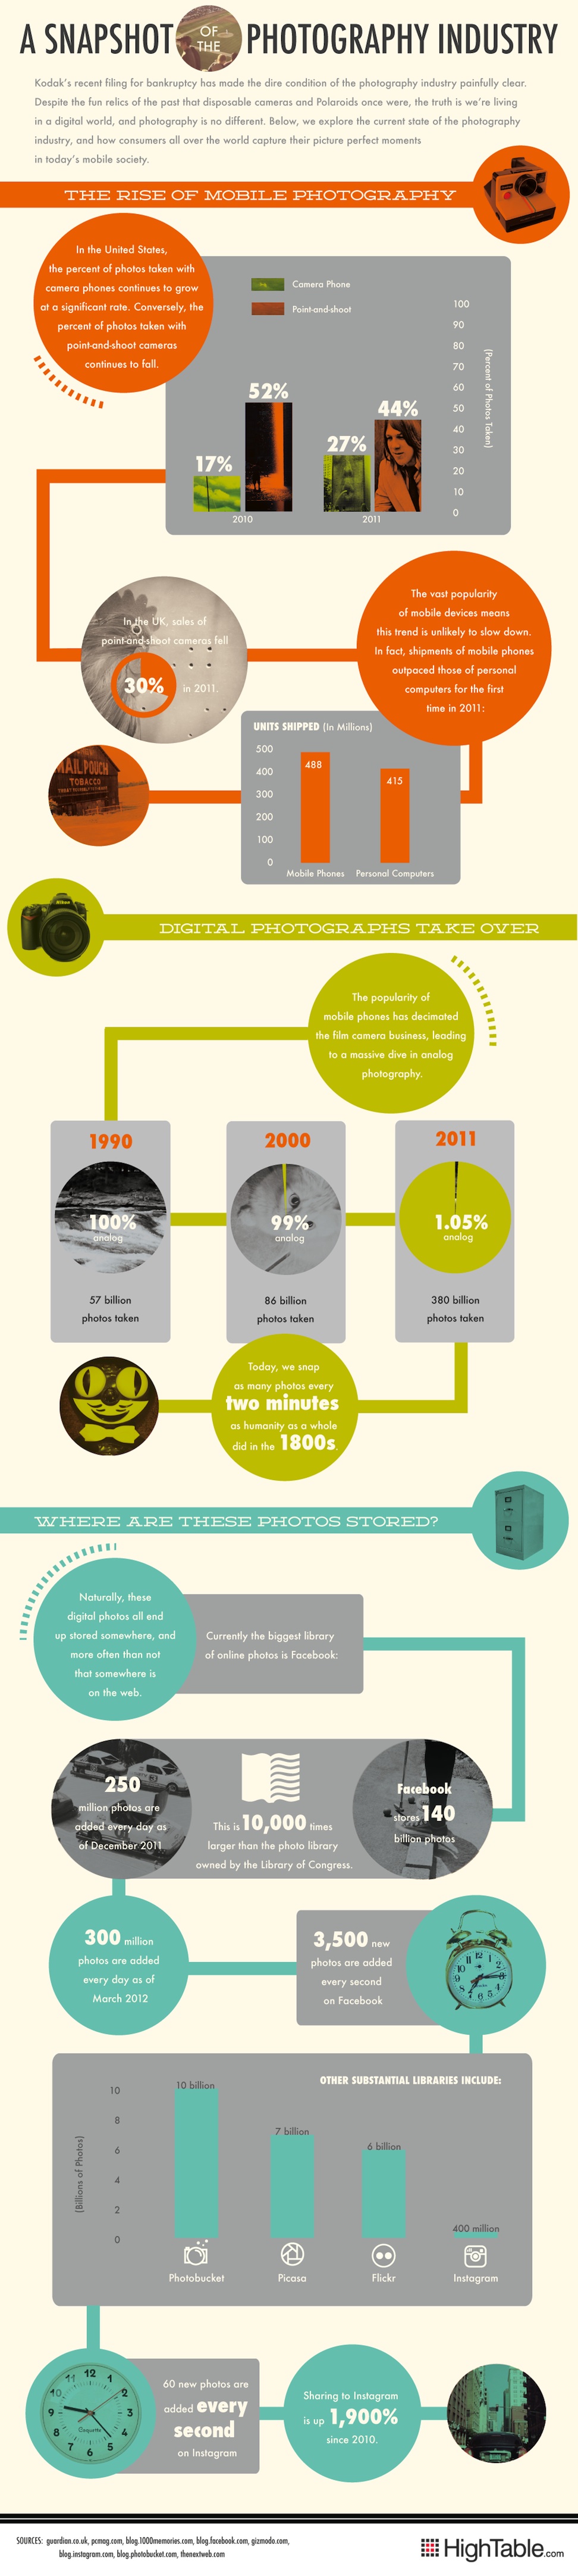 Snapshot-Of-Photography-Industry-infographic